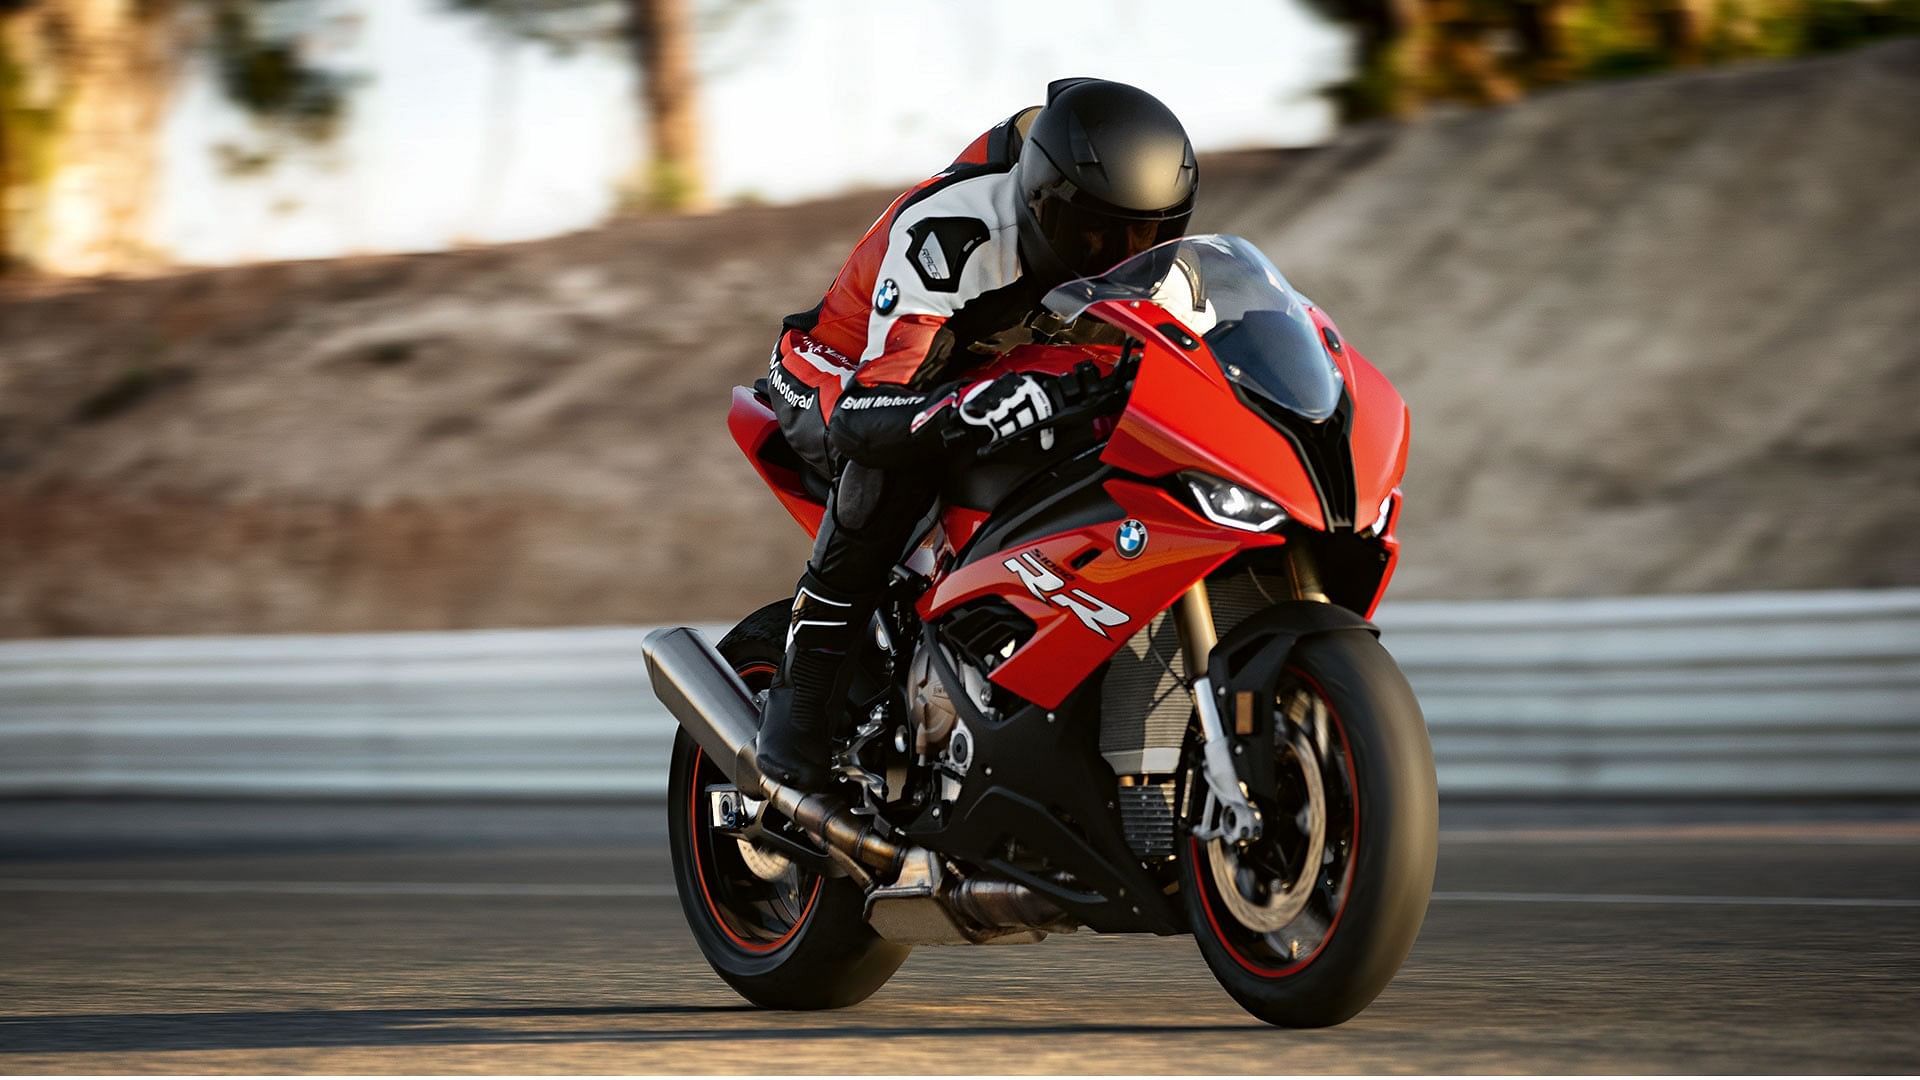 The BMW S1000RR is the brand's flagship supersport motorcycle.&nbsp;